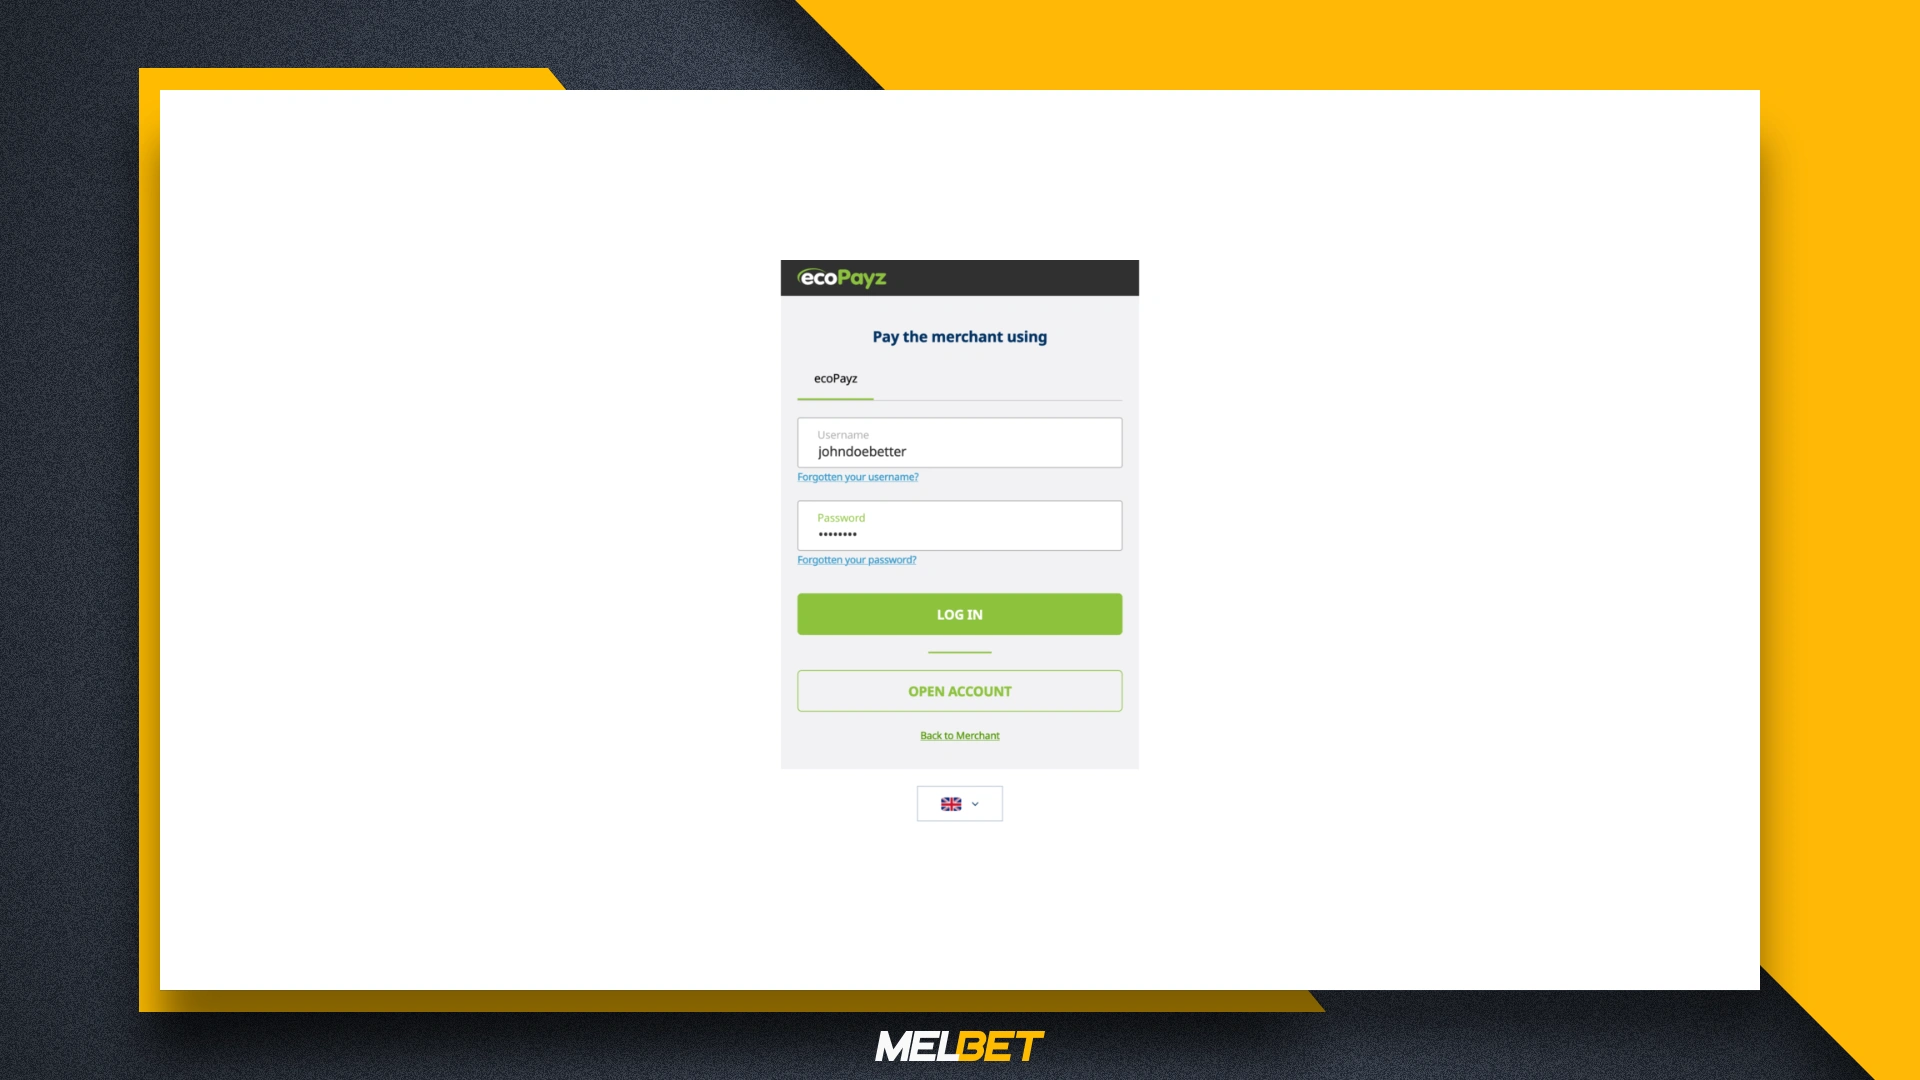 Confirm your intention to deposit to Melbet by completing the process on the payment system website